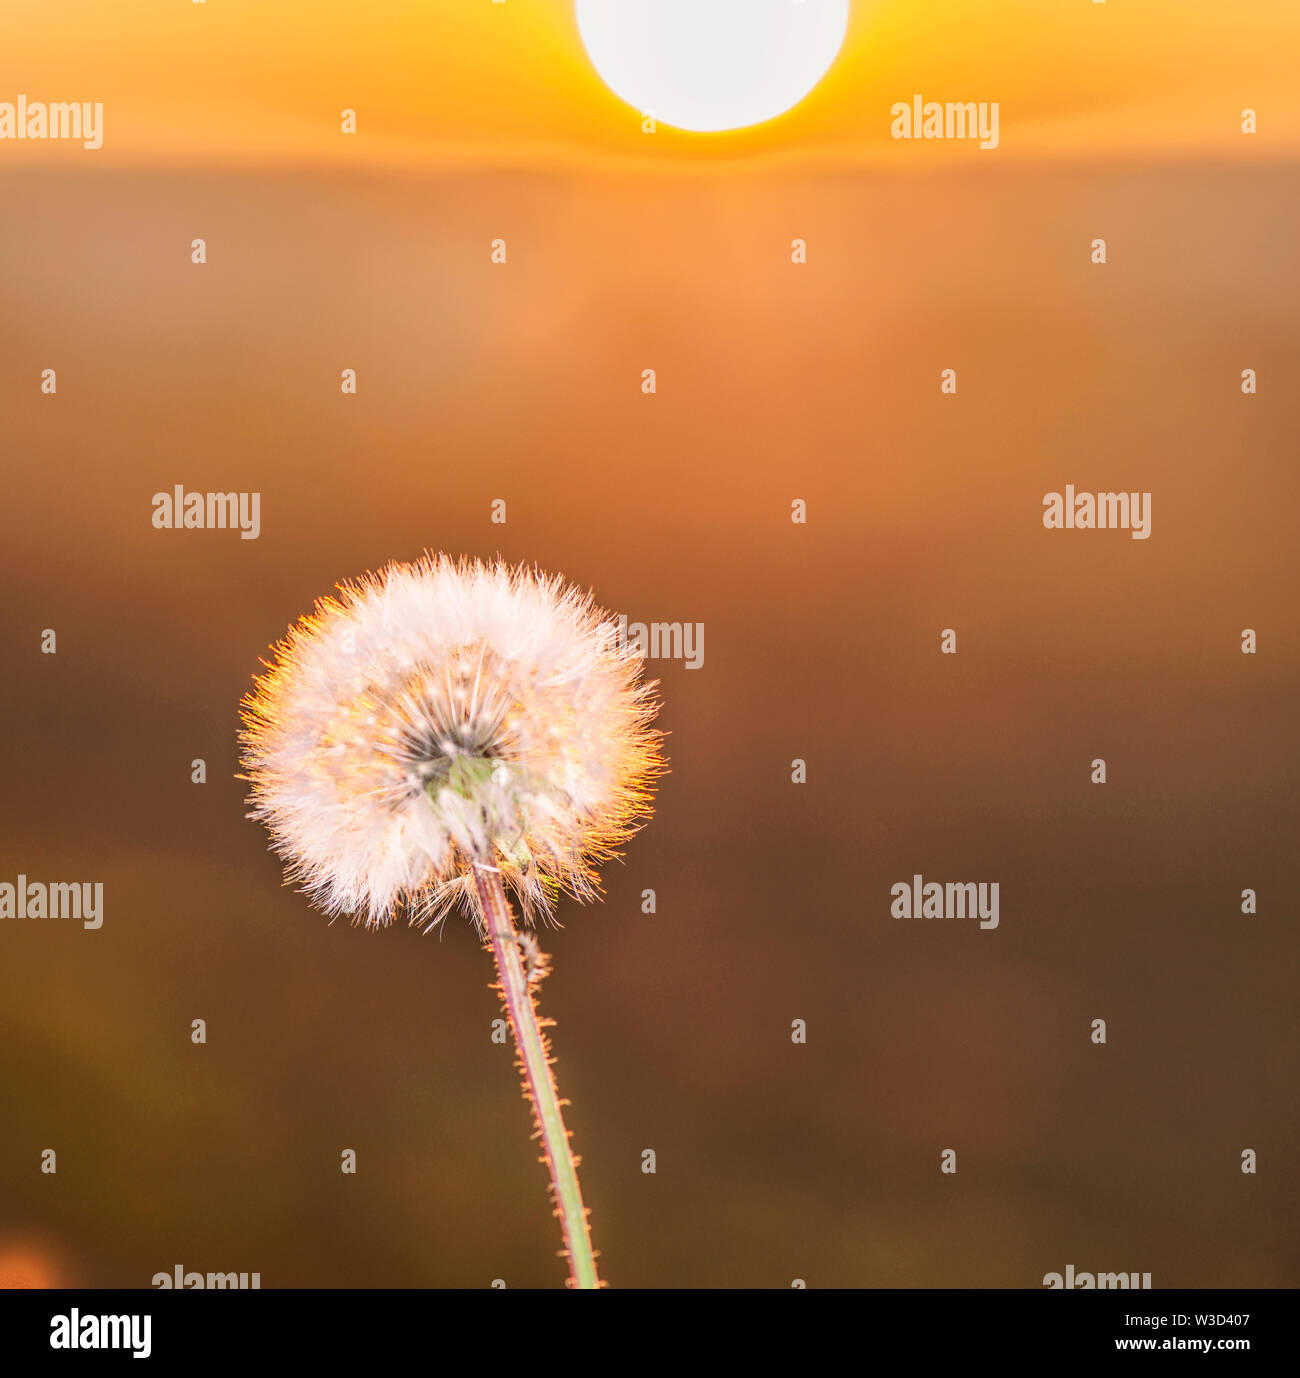 Closeup of a dandelion seed head (Taraxacum officinale) against the background of dawn in the field. Stock Photo